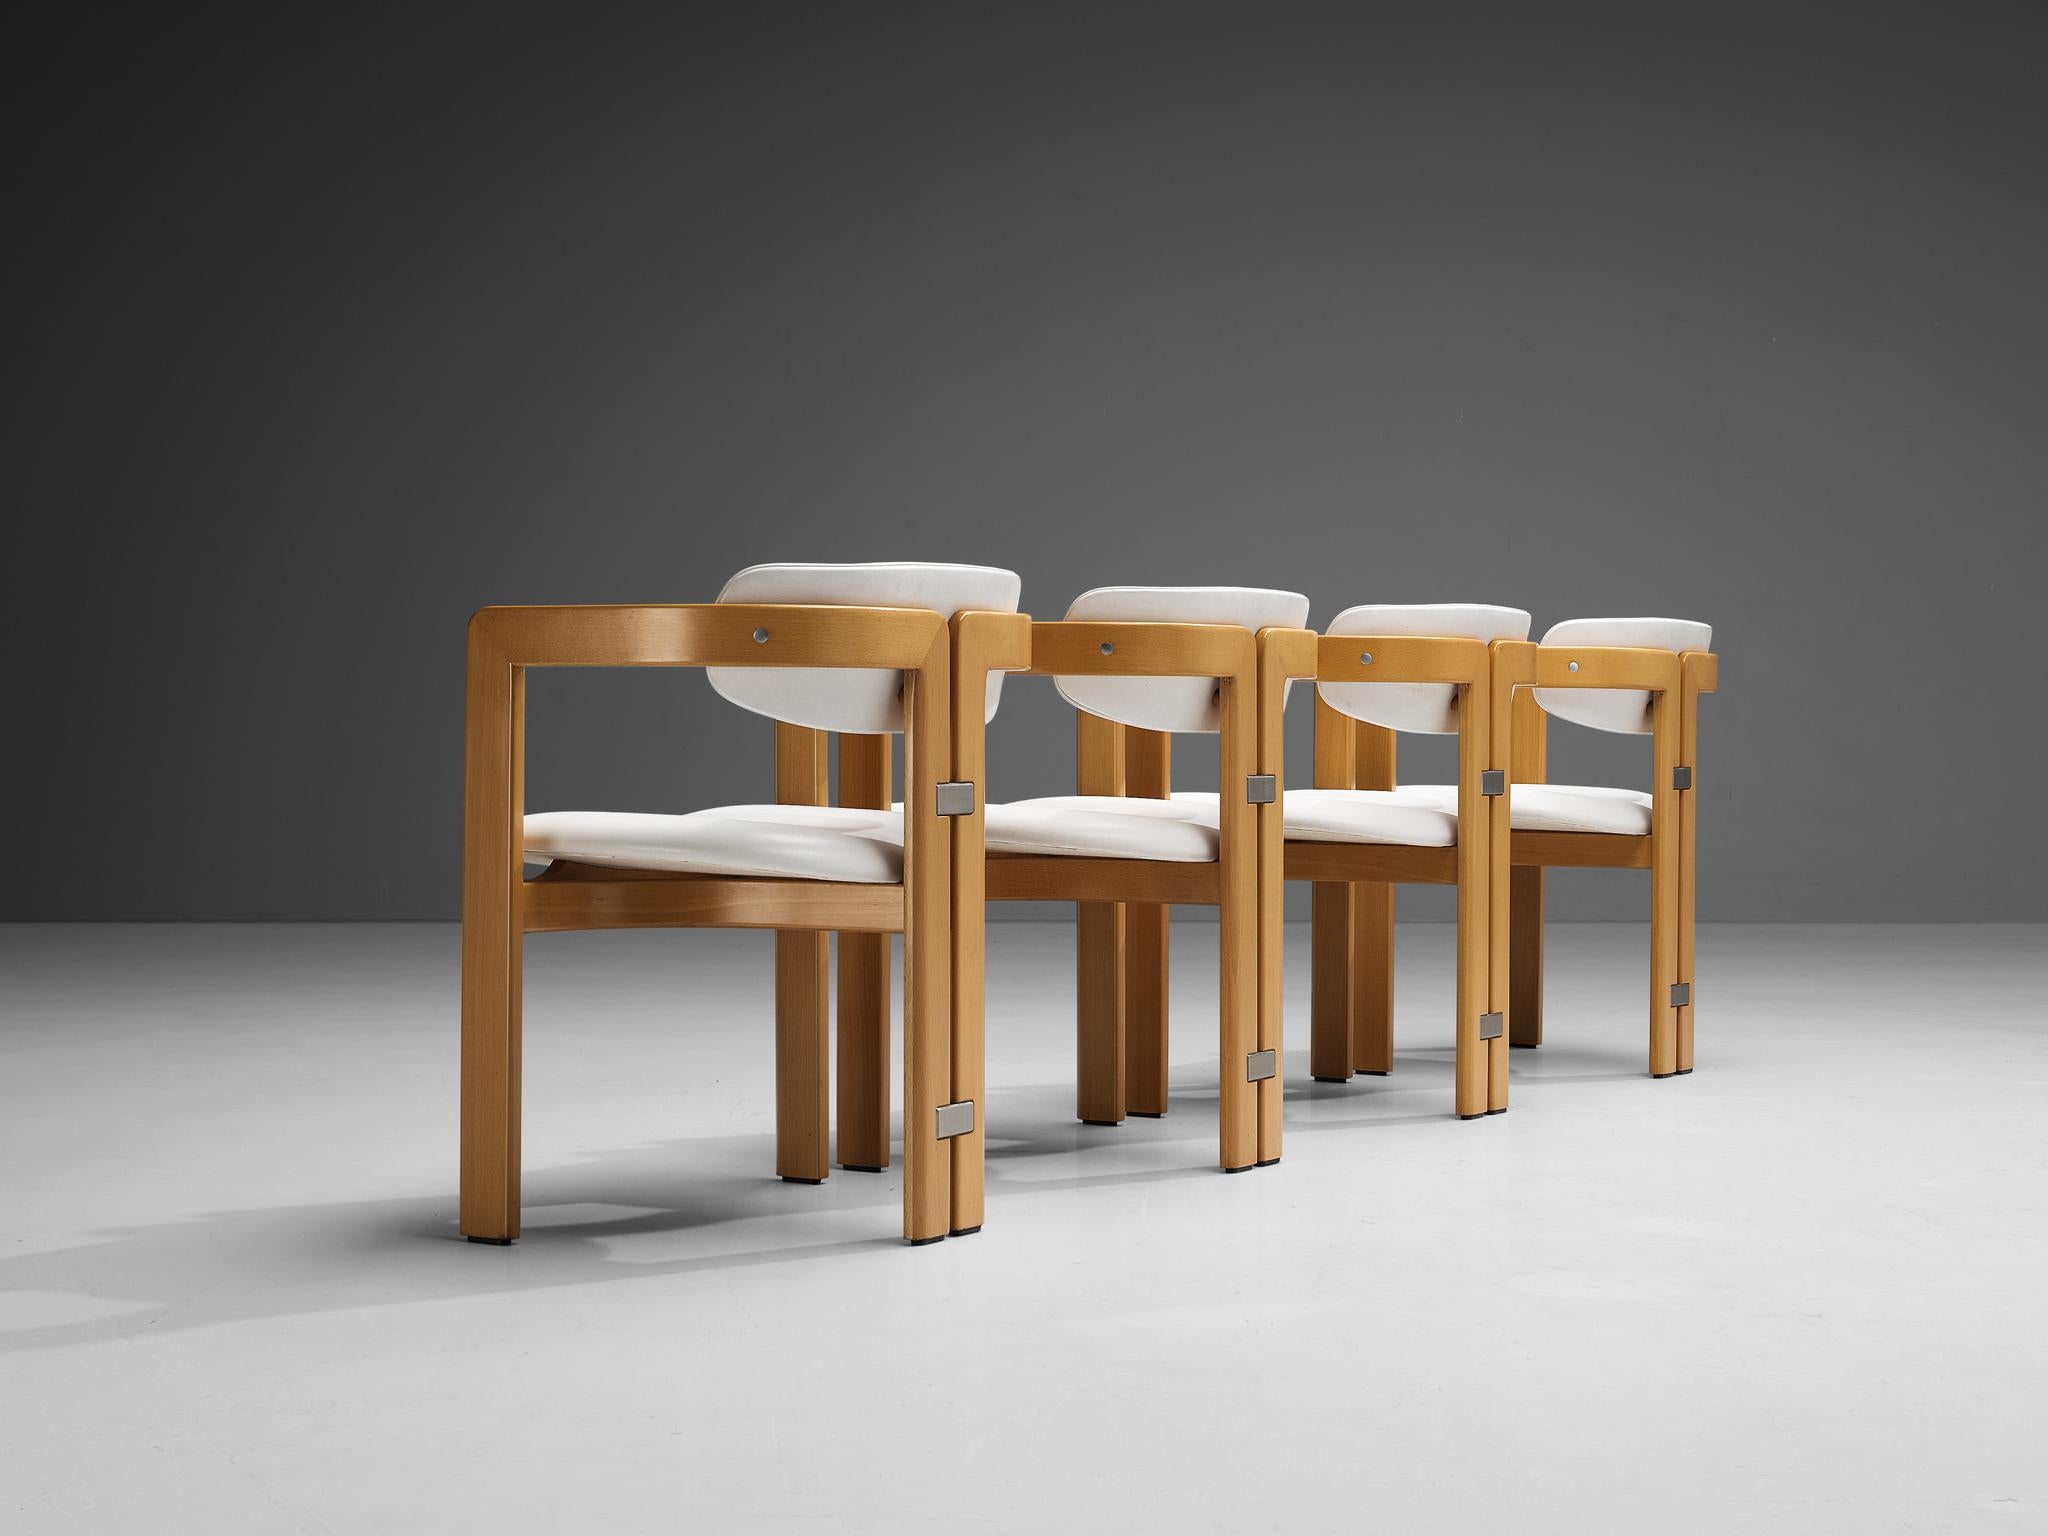 Augusto Savini for Pozzi, set of four 'Pamplona' dining chairs, lacquered wood, white leather upholstery, aluminum, Italy, 1965.

Set of four armchairs in lacquered wood and white leather upholstery. A characteristic design; simplistic yet very